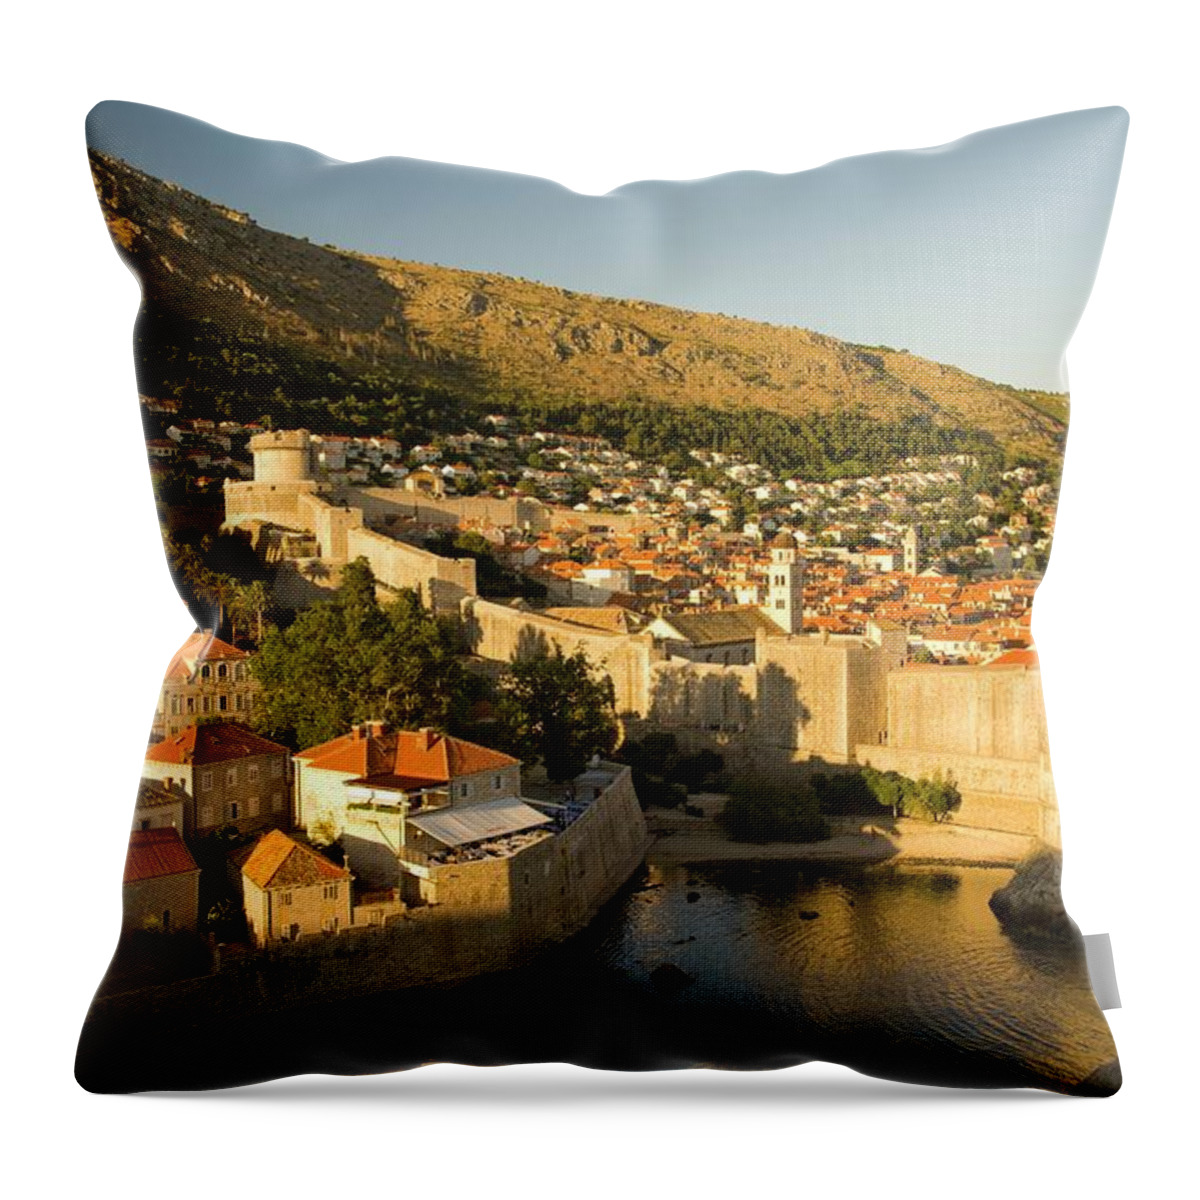 Adriatic Sea Throw Pillow featuring the photograph View From Lovrijenac Fortress Of The by Stuart Westmorland